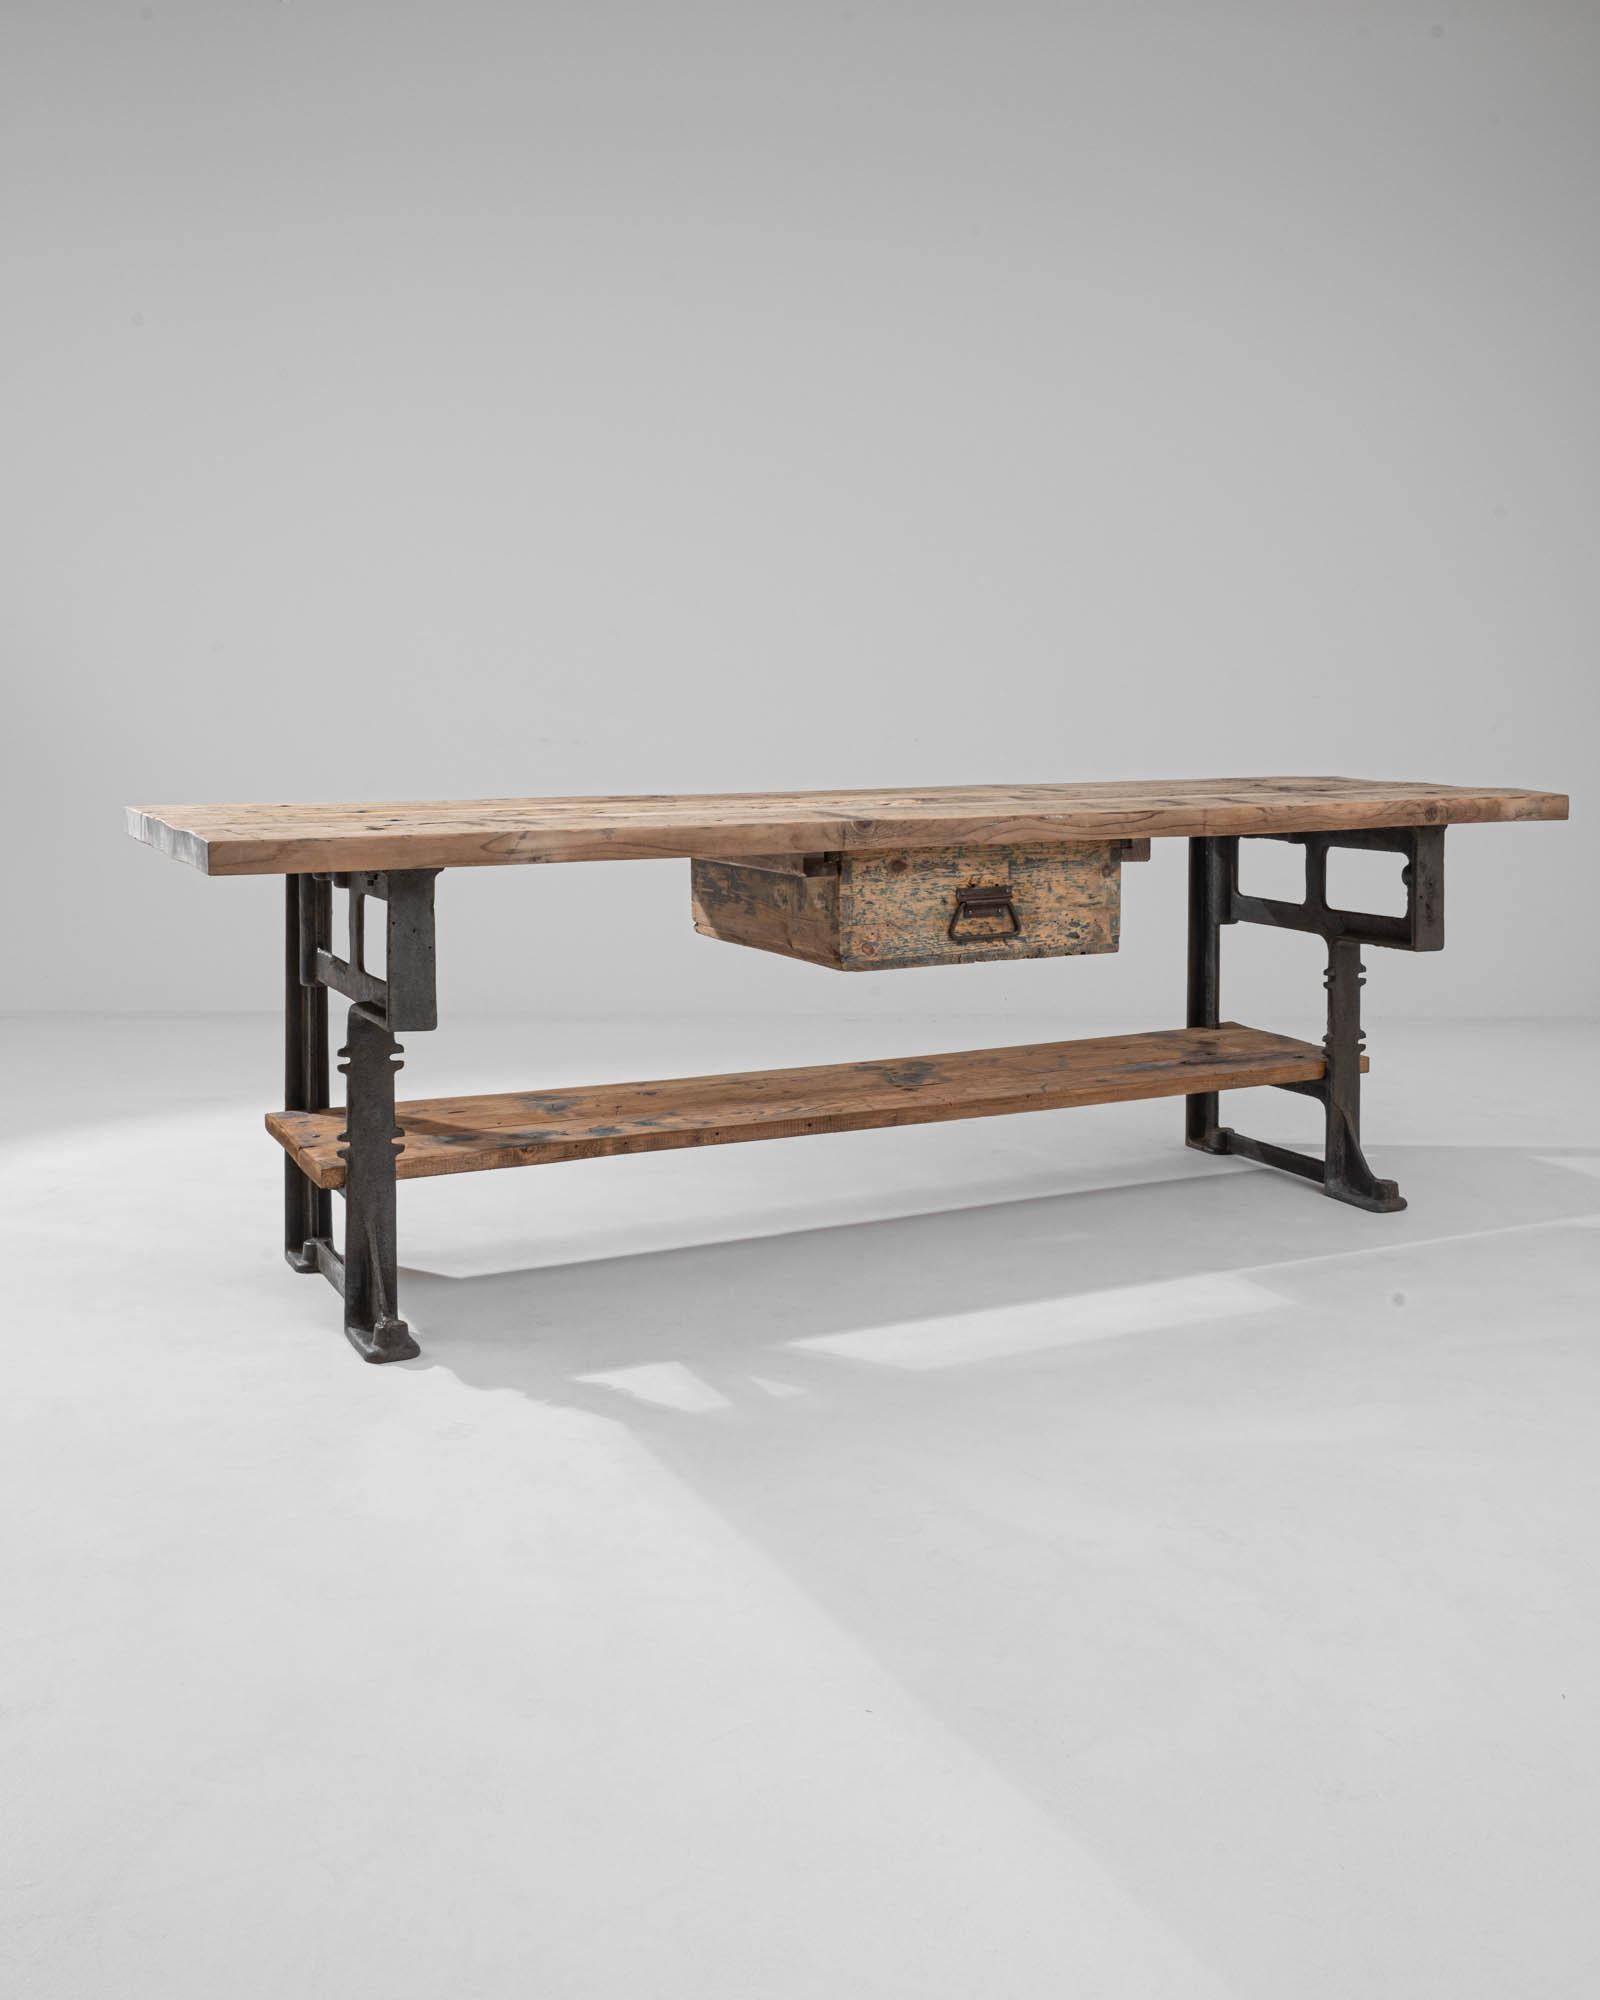 The bold Industrial aesthetic of this vintage work table combines practicality with vigor. Made in Central Europe in the 20th century, the planks of the wooden tabletop provide a generous and sturdy work surface, while the solid, angular silhouette